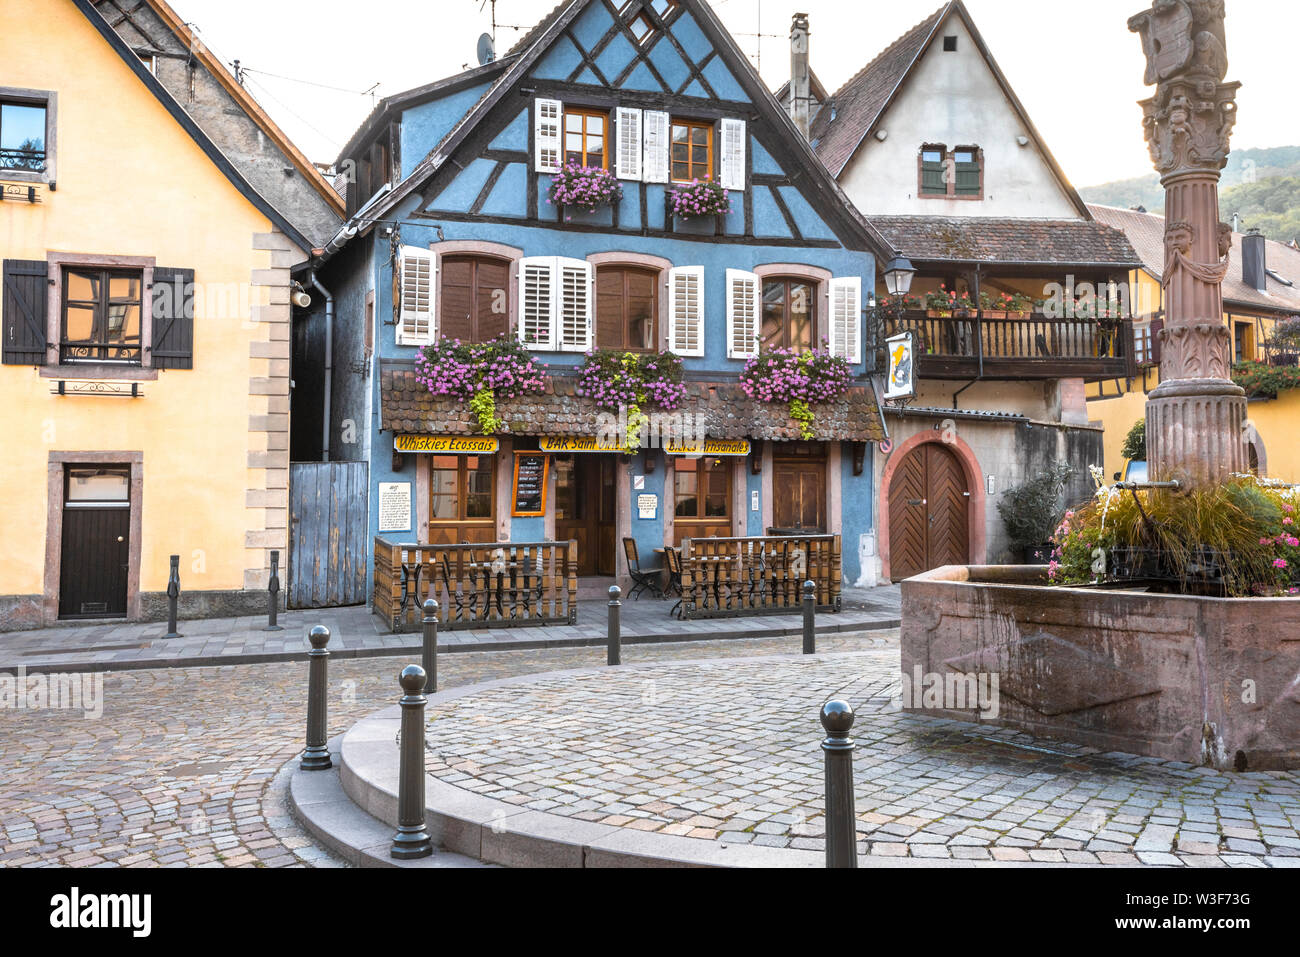 old timbered houses in the village Ribeauvillé, Alsace Wine Route, France, colorful houses around a well Stock Photo